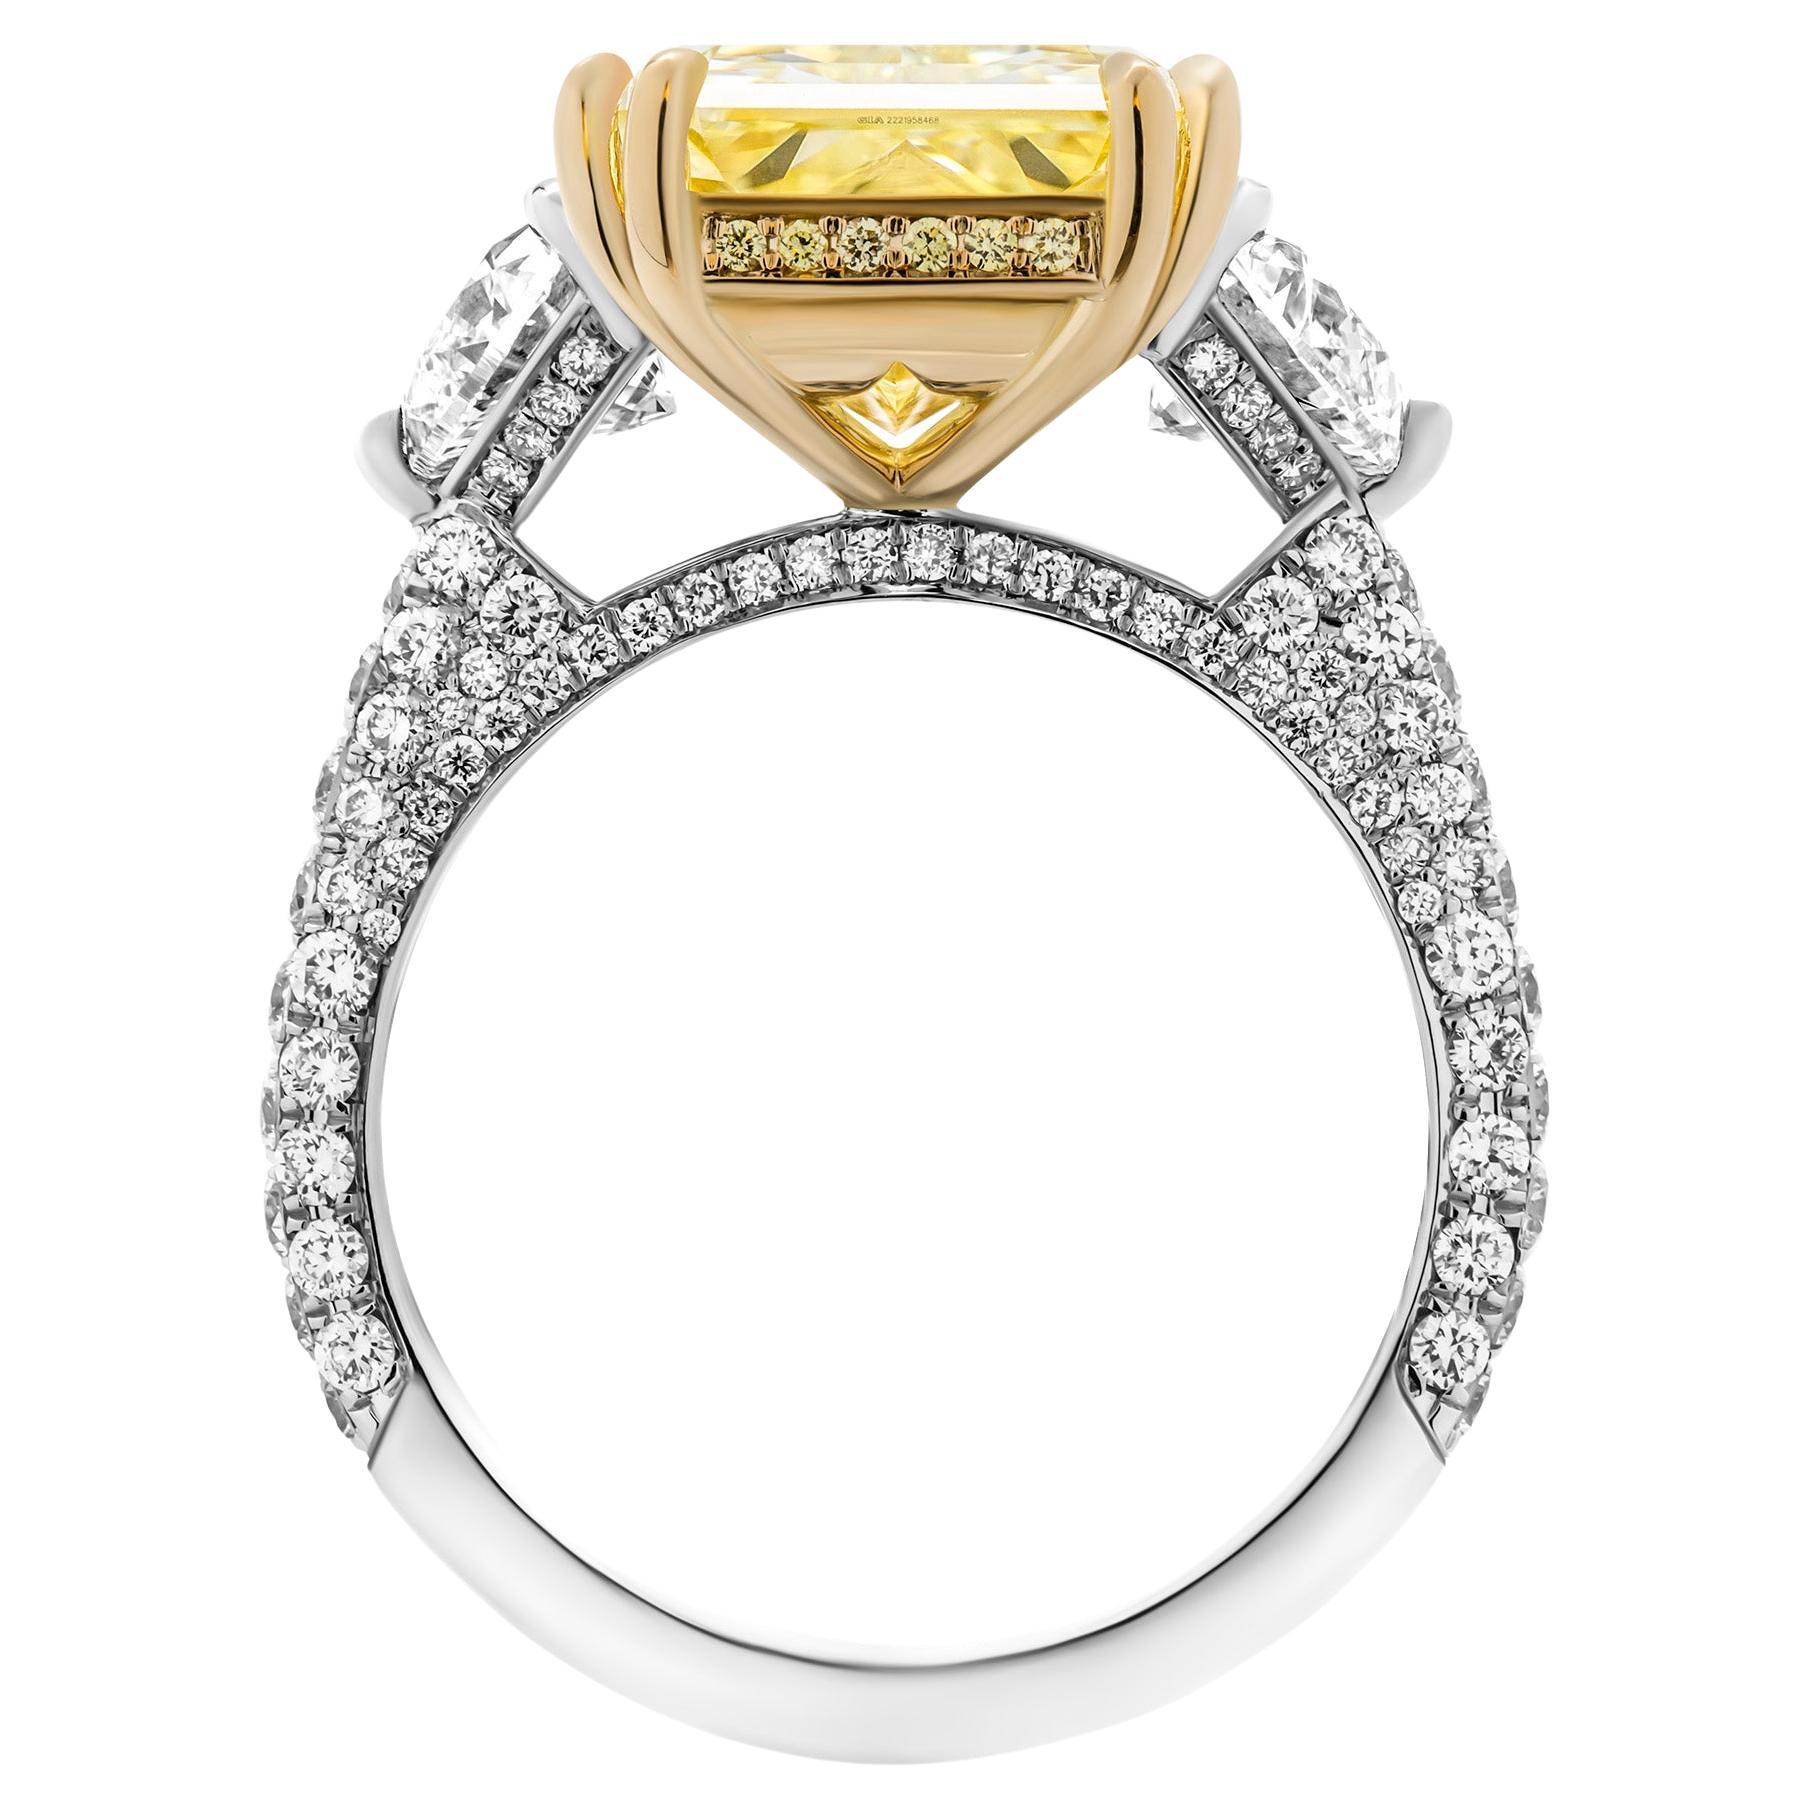 GIA Certified 3 stone ring in 18K Yellow Gold & Platinum 

Center stone: 5.38ct Natural Fancy Yellow VS1 Radiant GIA#7463281247 
Two side stones: 0.31ct D IF GIA#1433628992 trapezoid 
                             shape diamond 
                     